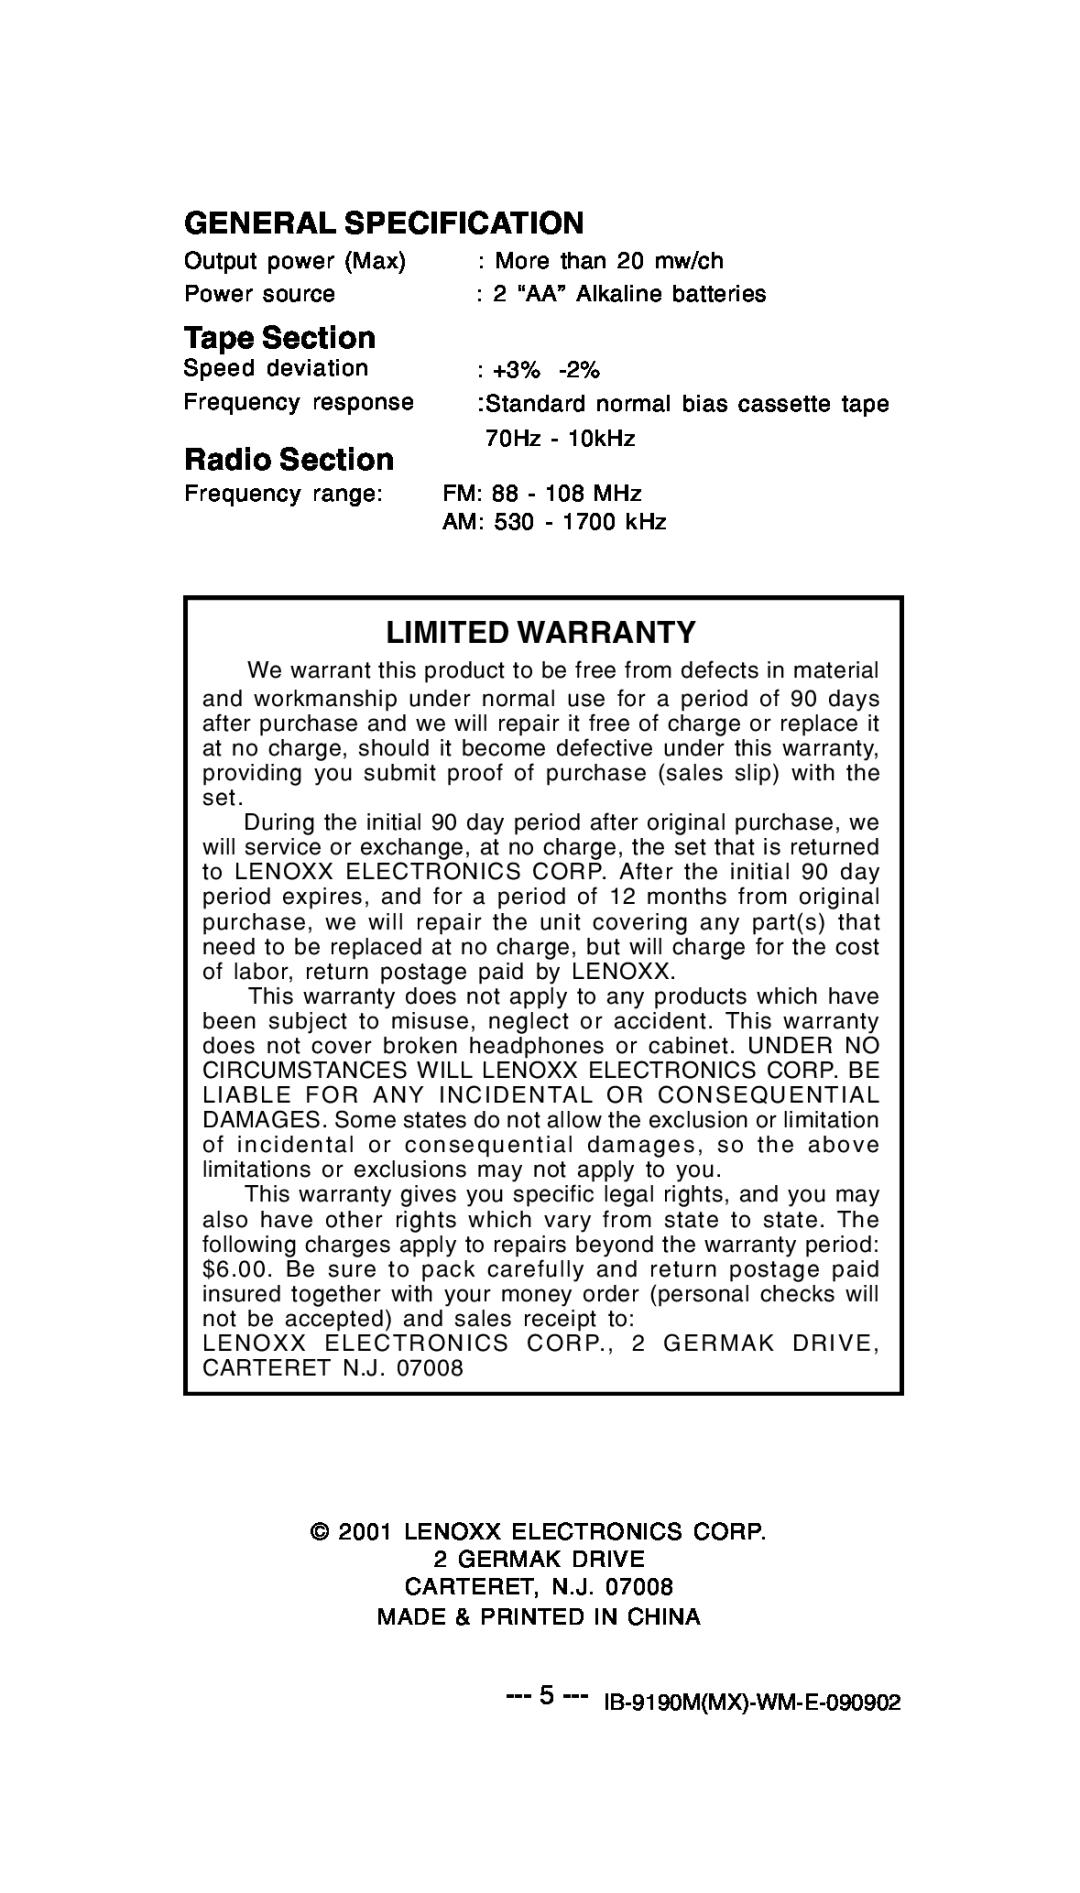 Lenoxx Electronics 9190M operating instructions General Specification, Tape Section, Radio Section, Limited Warranty 